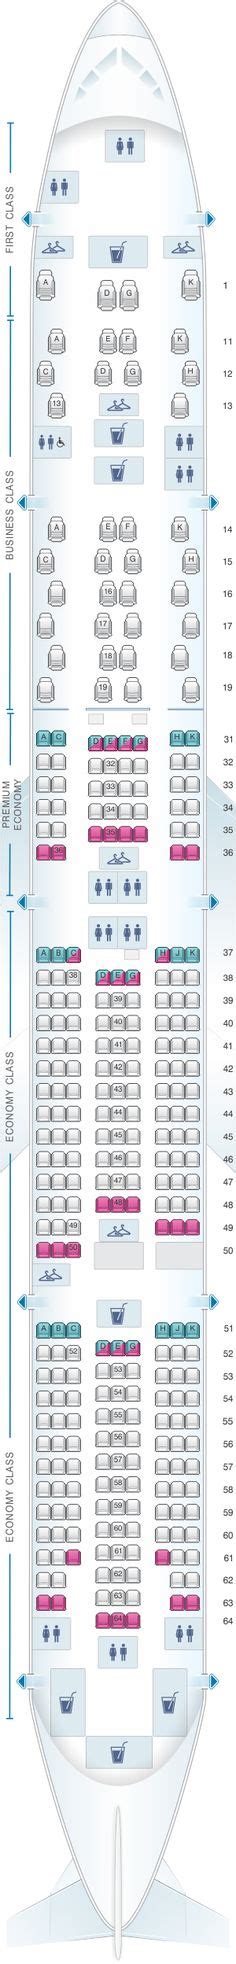 Seat Map China Southern Airlines Boeing B777 300er China Southern